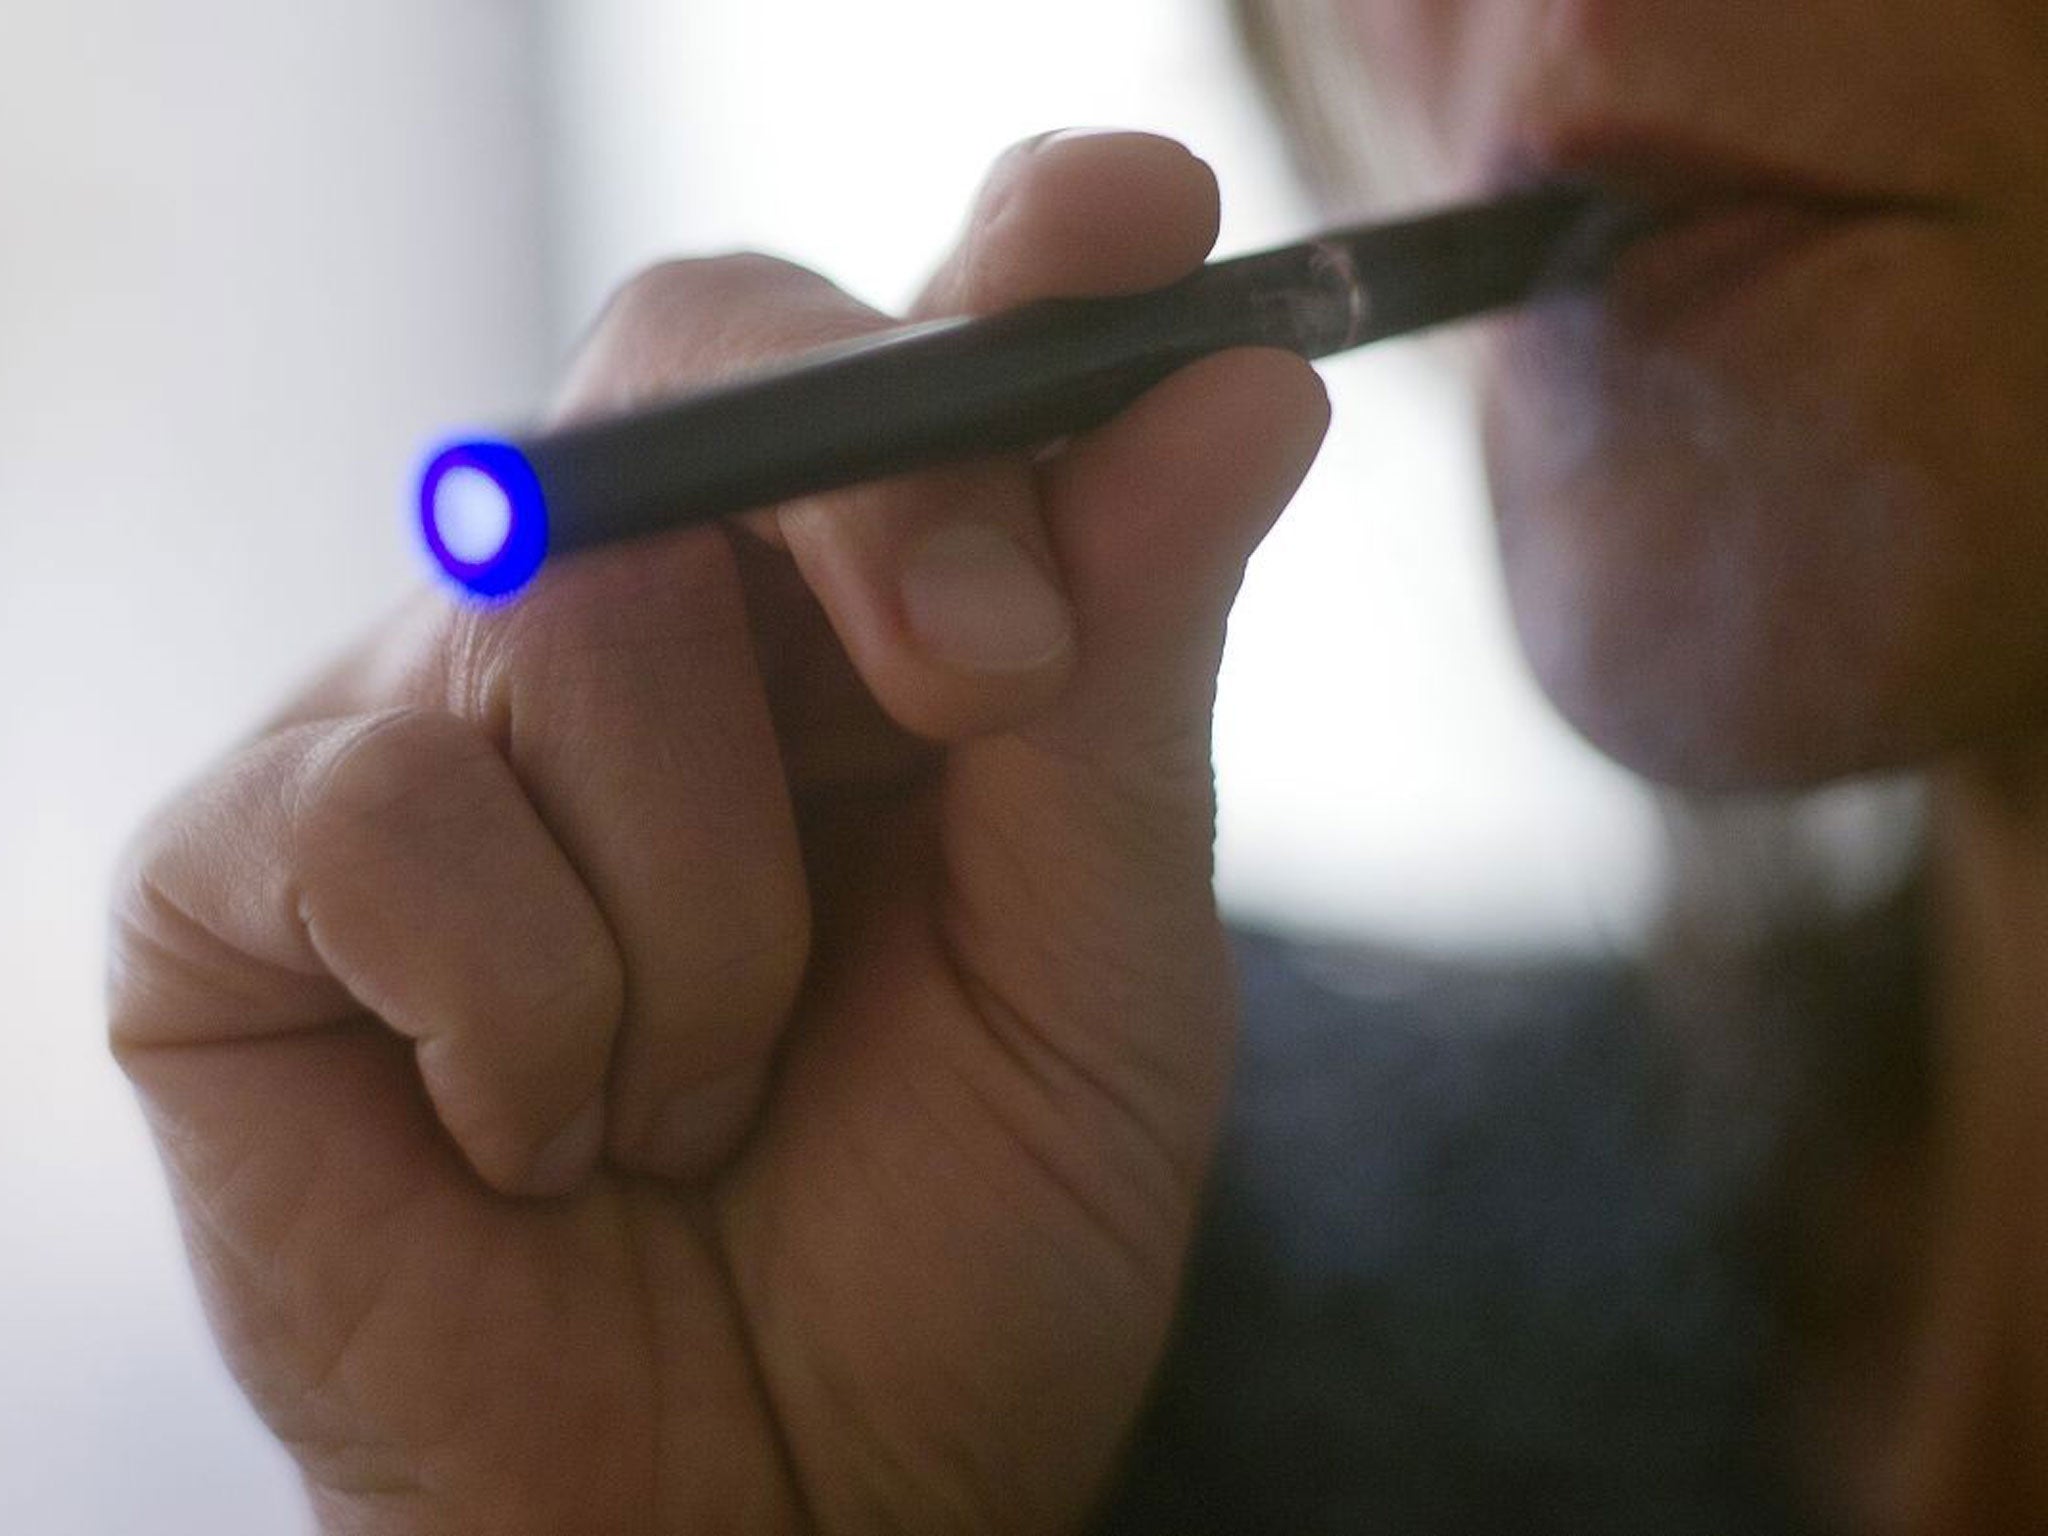 Doctors worry e-cigarettes will give youngsters a taste for nicotine